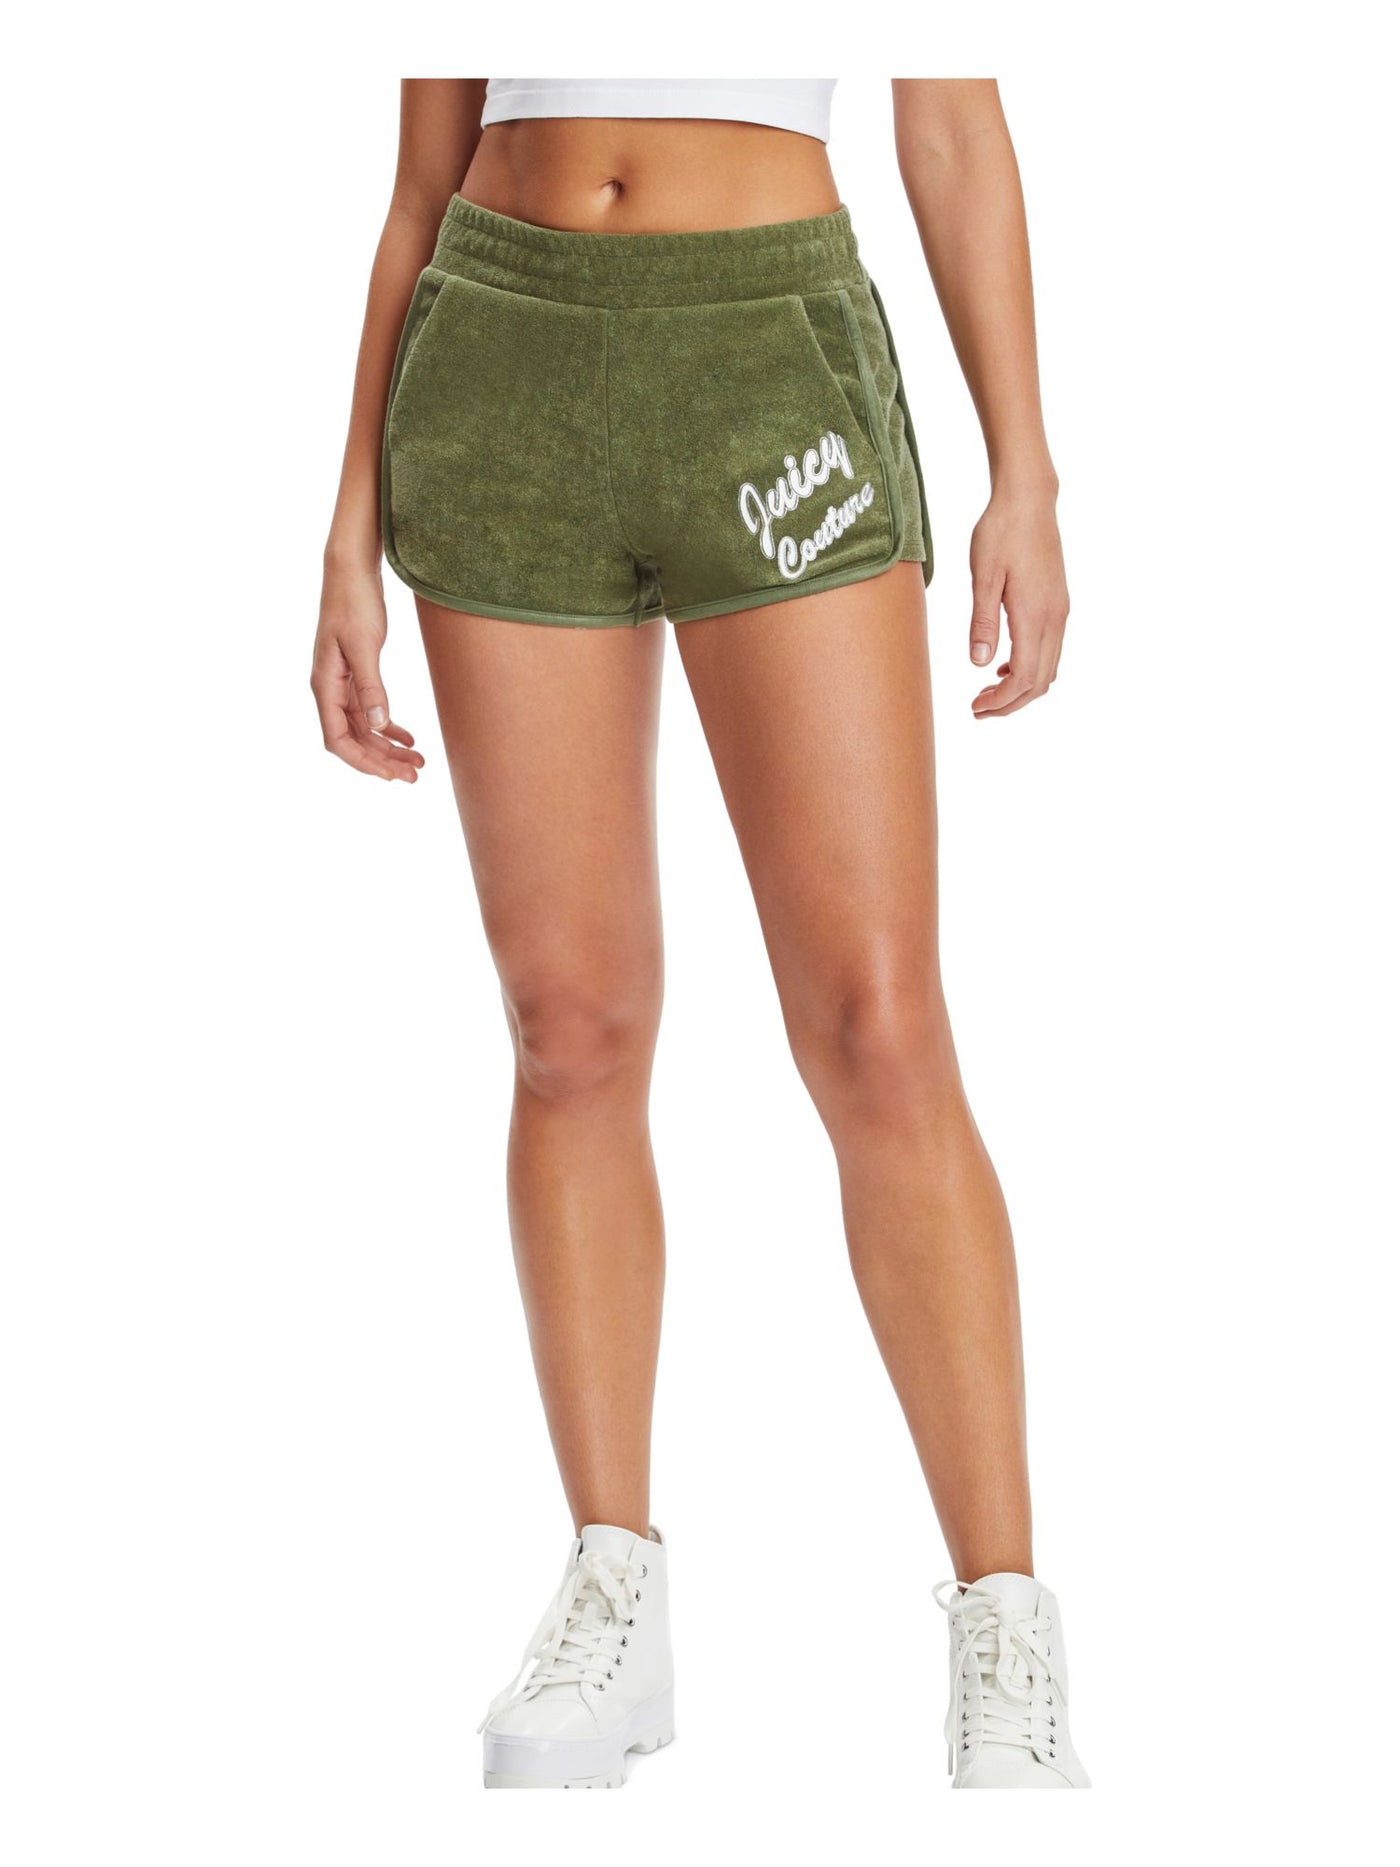 JUICY COUTURE Womens Green Pocketed Elastic Waist Pull-on Shorts S